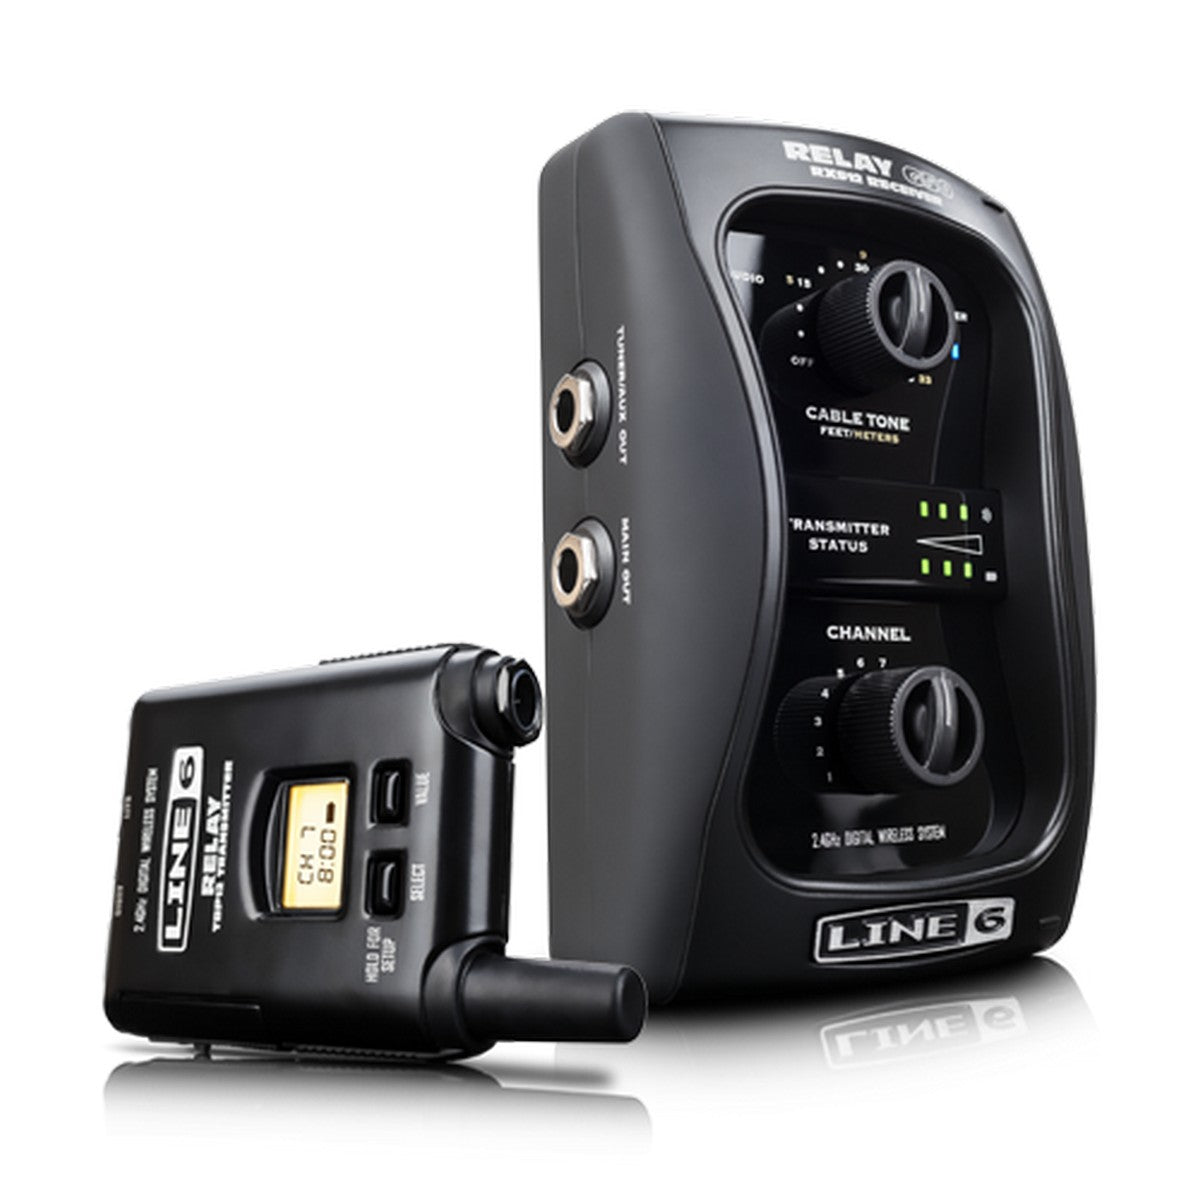 Line 6 Relay G50 | 99-123-0105 12 Channel 2.4 GHz Digital Guitar Wireless System with Pro-Stompbox Receiver